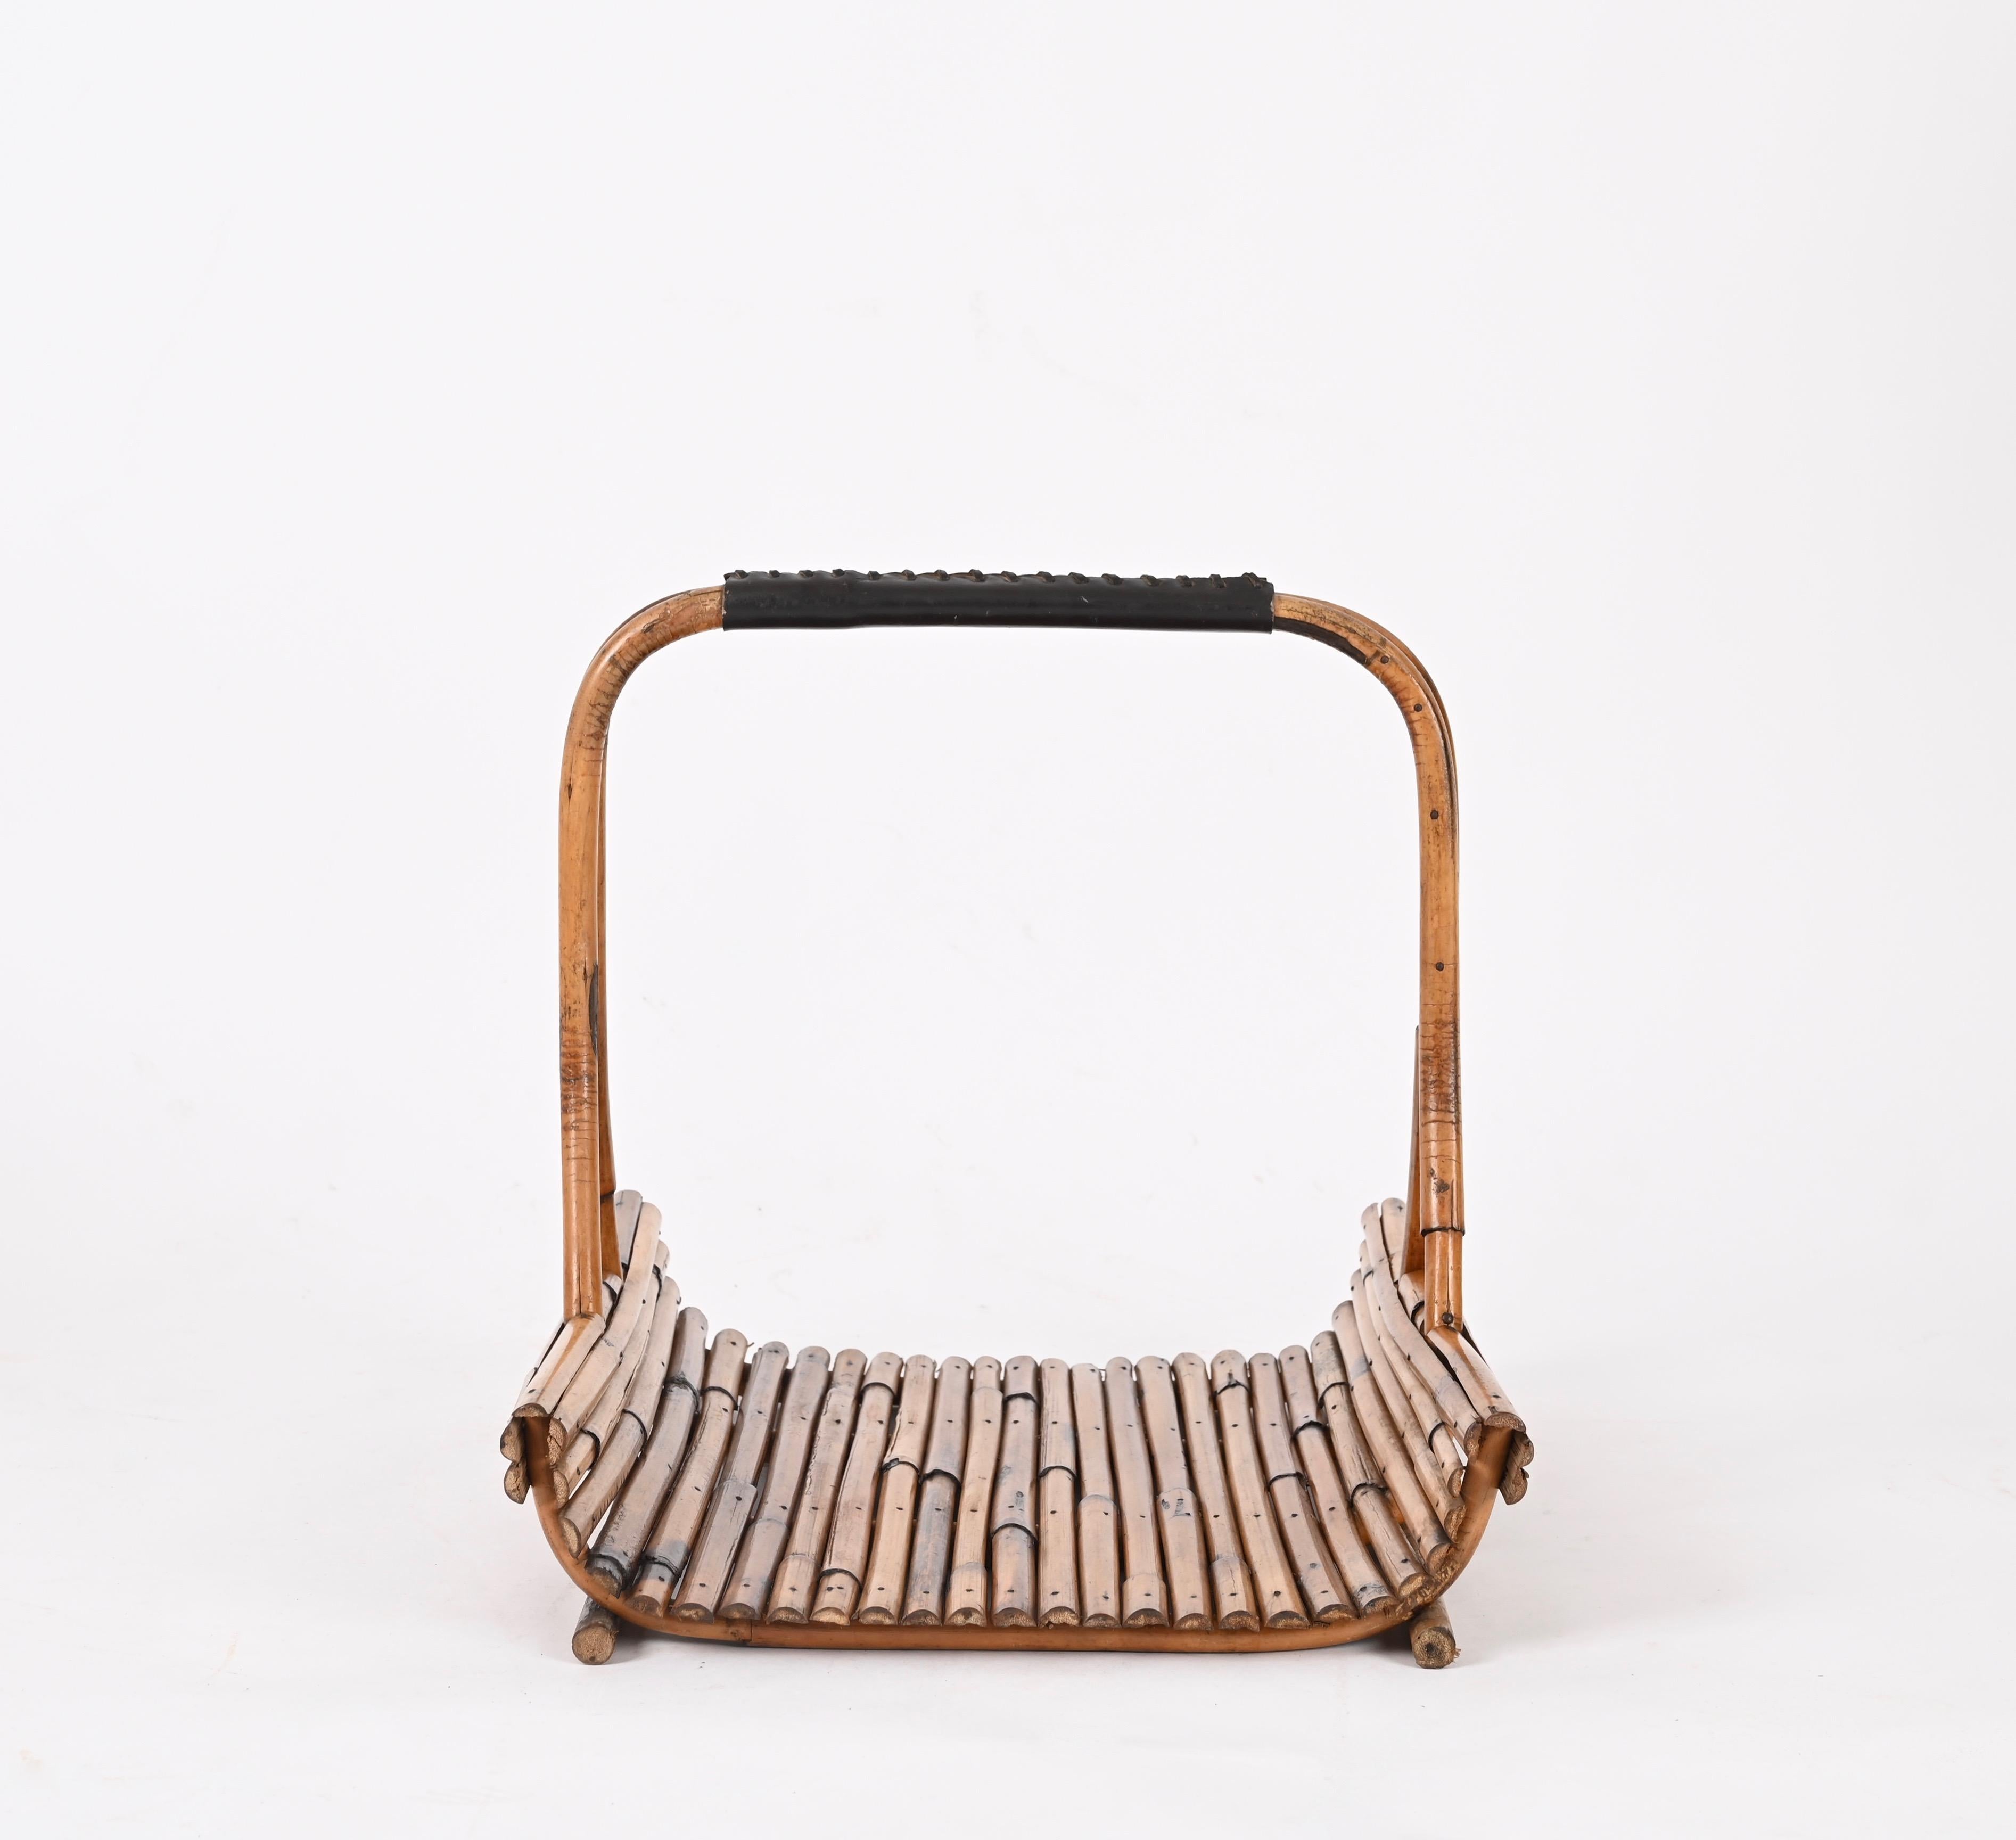 Midcentury French Riviera Rattan and Leather Italian Magazine Rack, 1960s For Sale 3